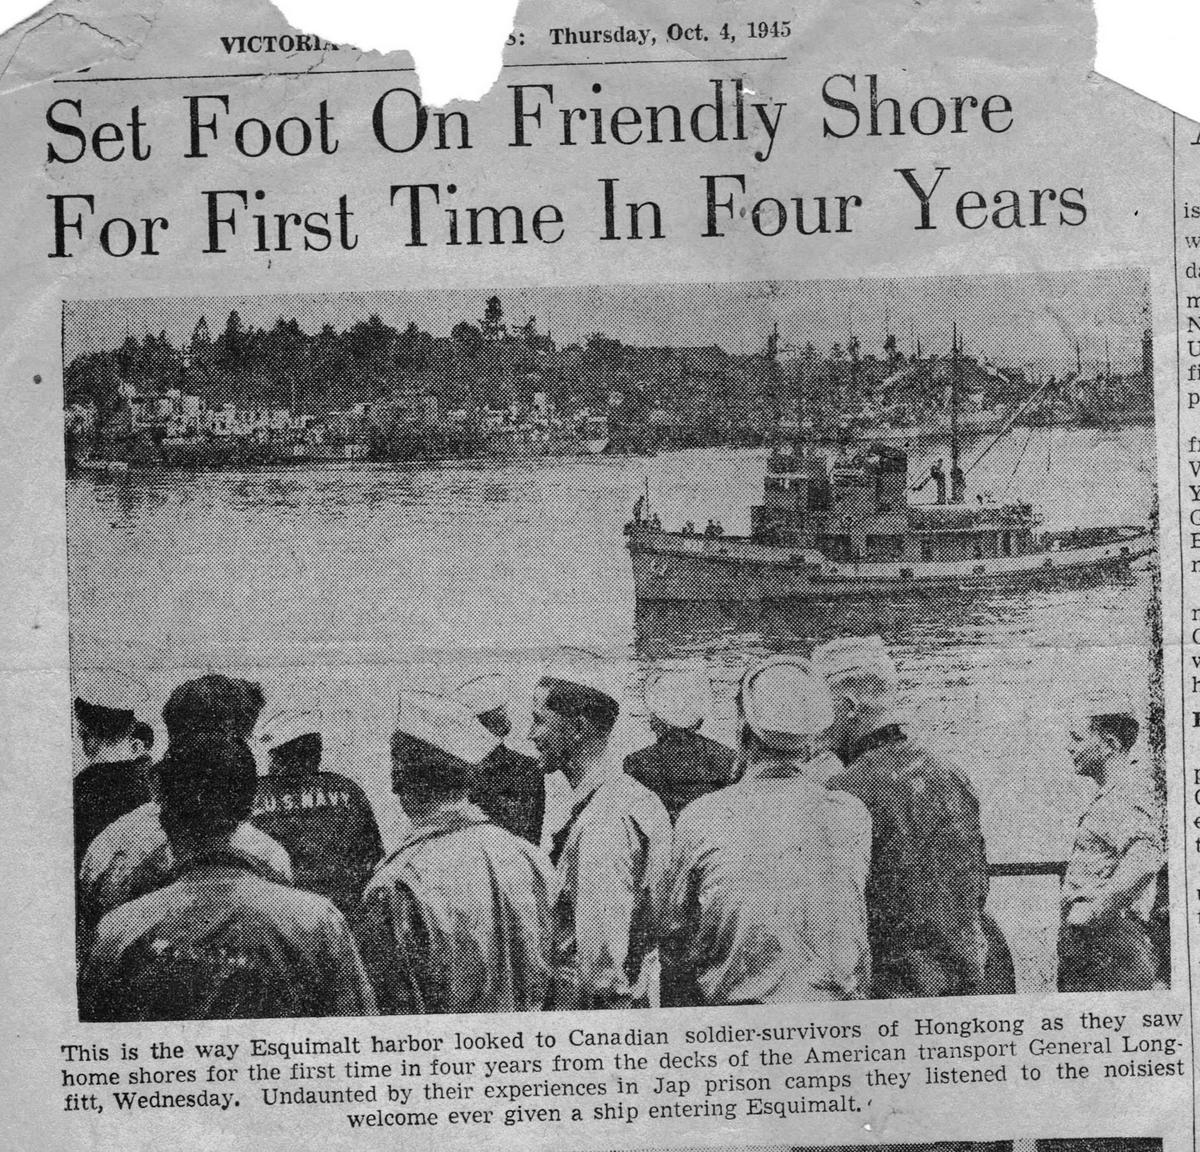 Press clipping from Victoria showing arrival